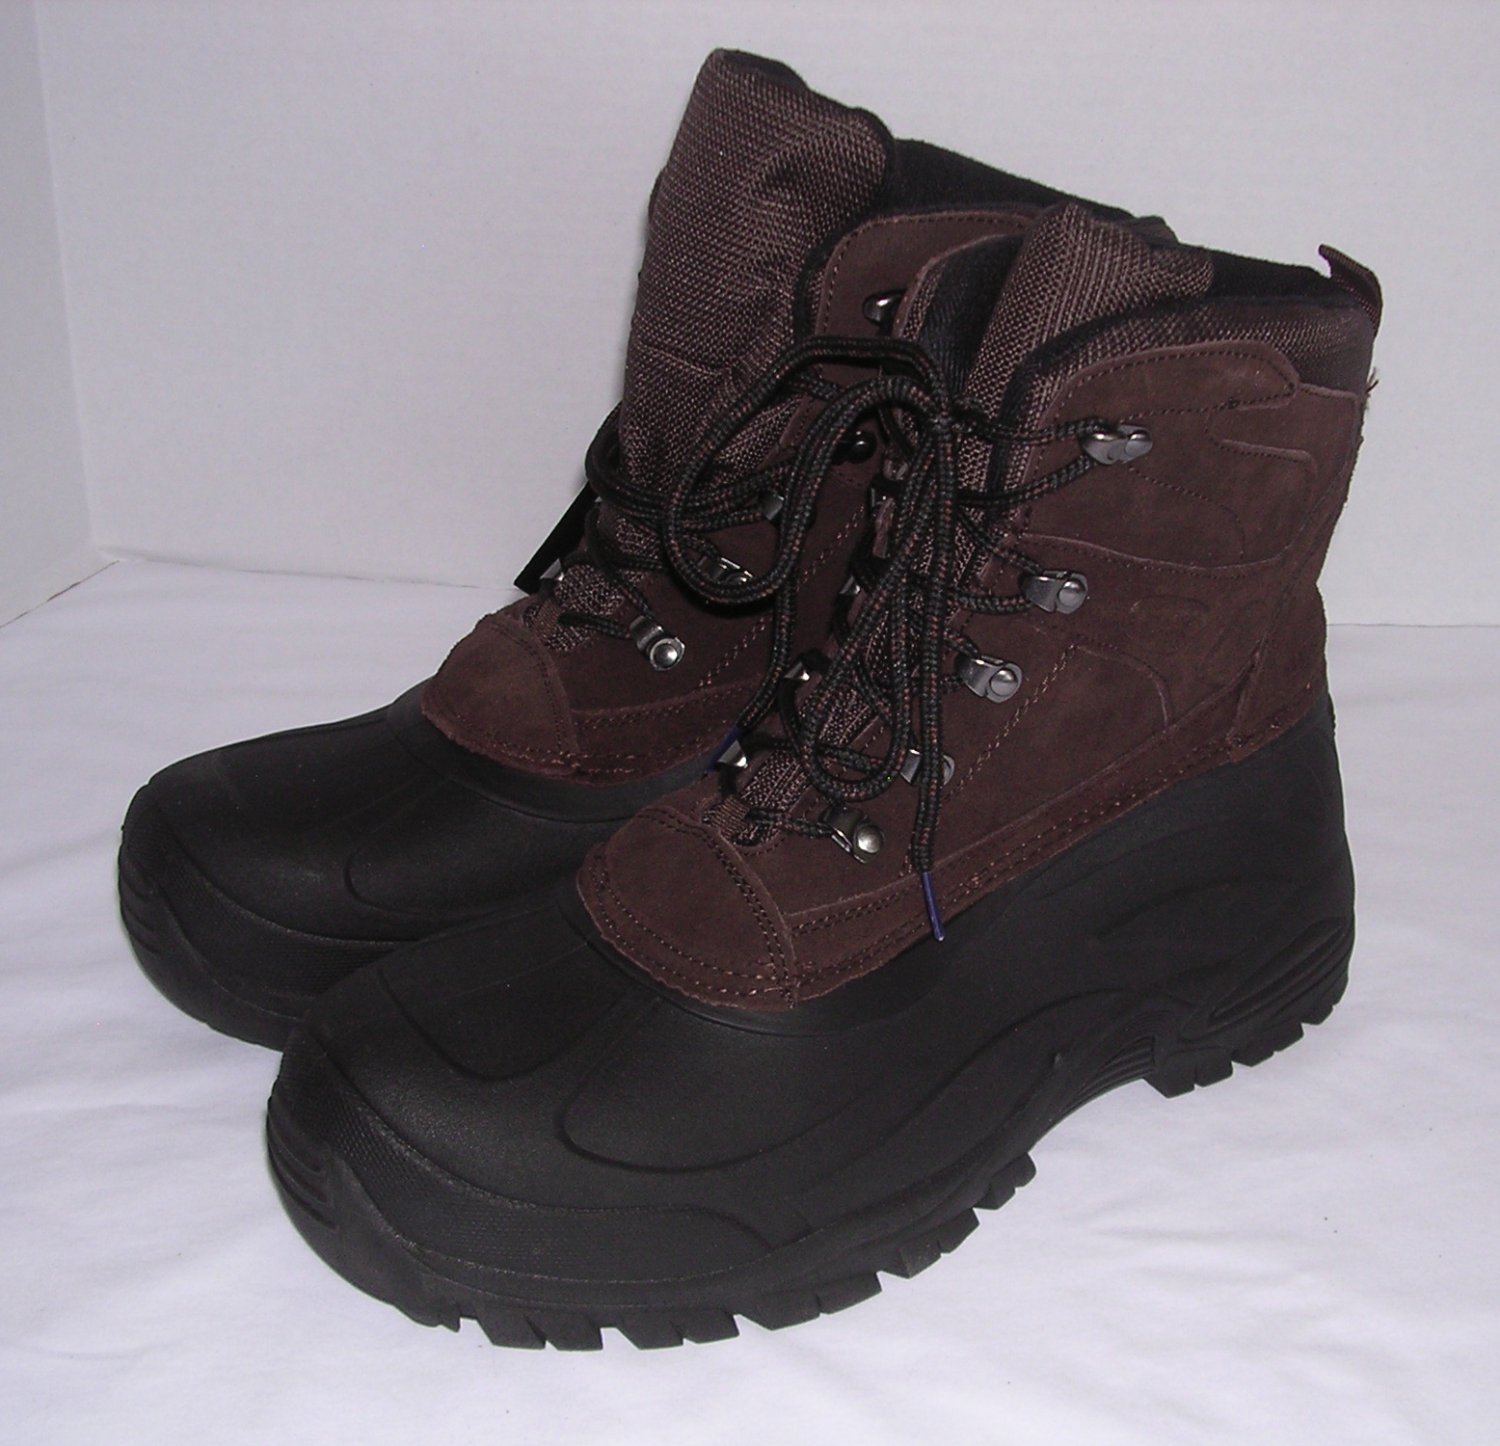 Weatherproof Winter Boots Men 13M Brown Suede/Rubber Sole~Thinsulate Insulation Rated -20Â°F 8â��NWT